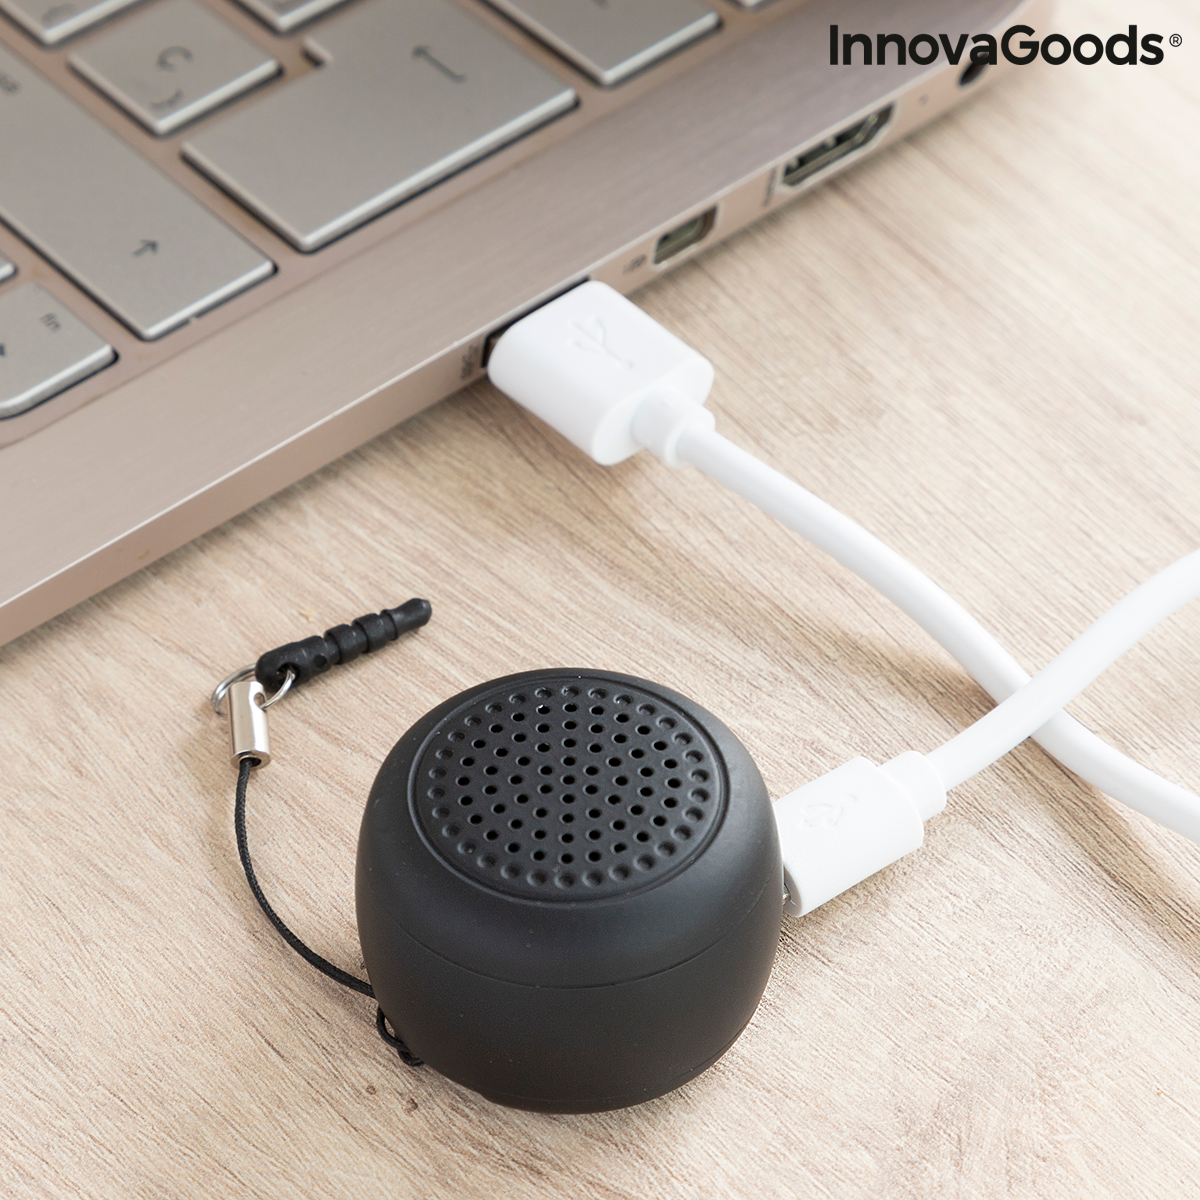 Rechargeable Portable Wireless Mini Speaker Miund InnovaGoods